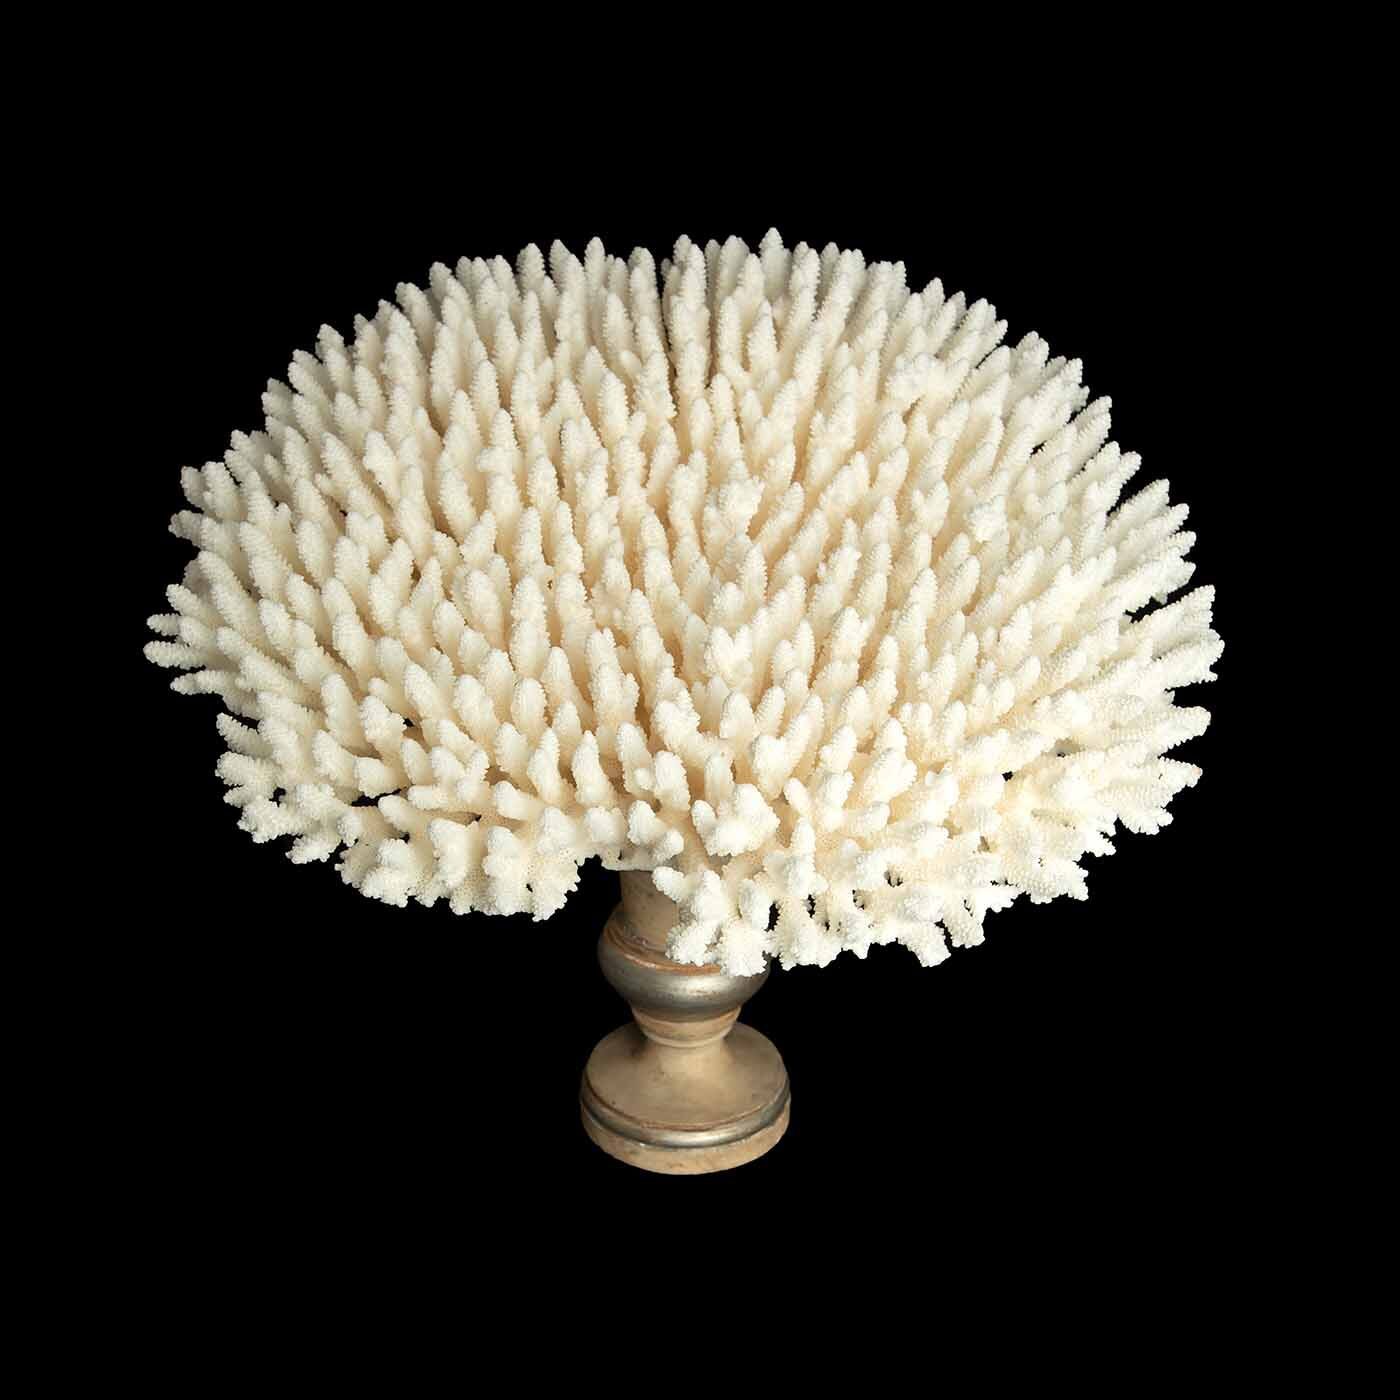 Table Coral Mounted On Medici Style Base